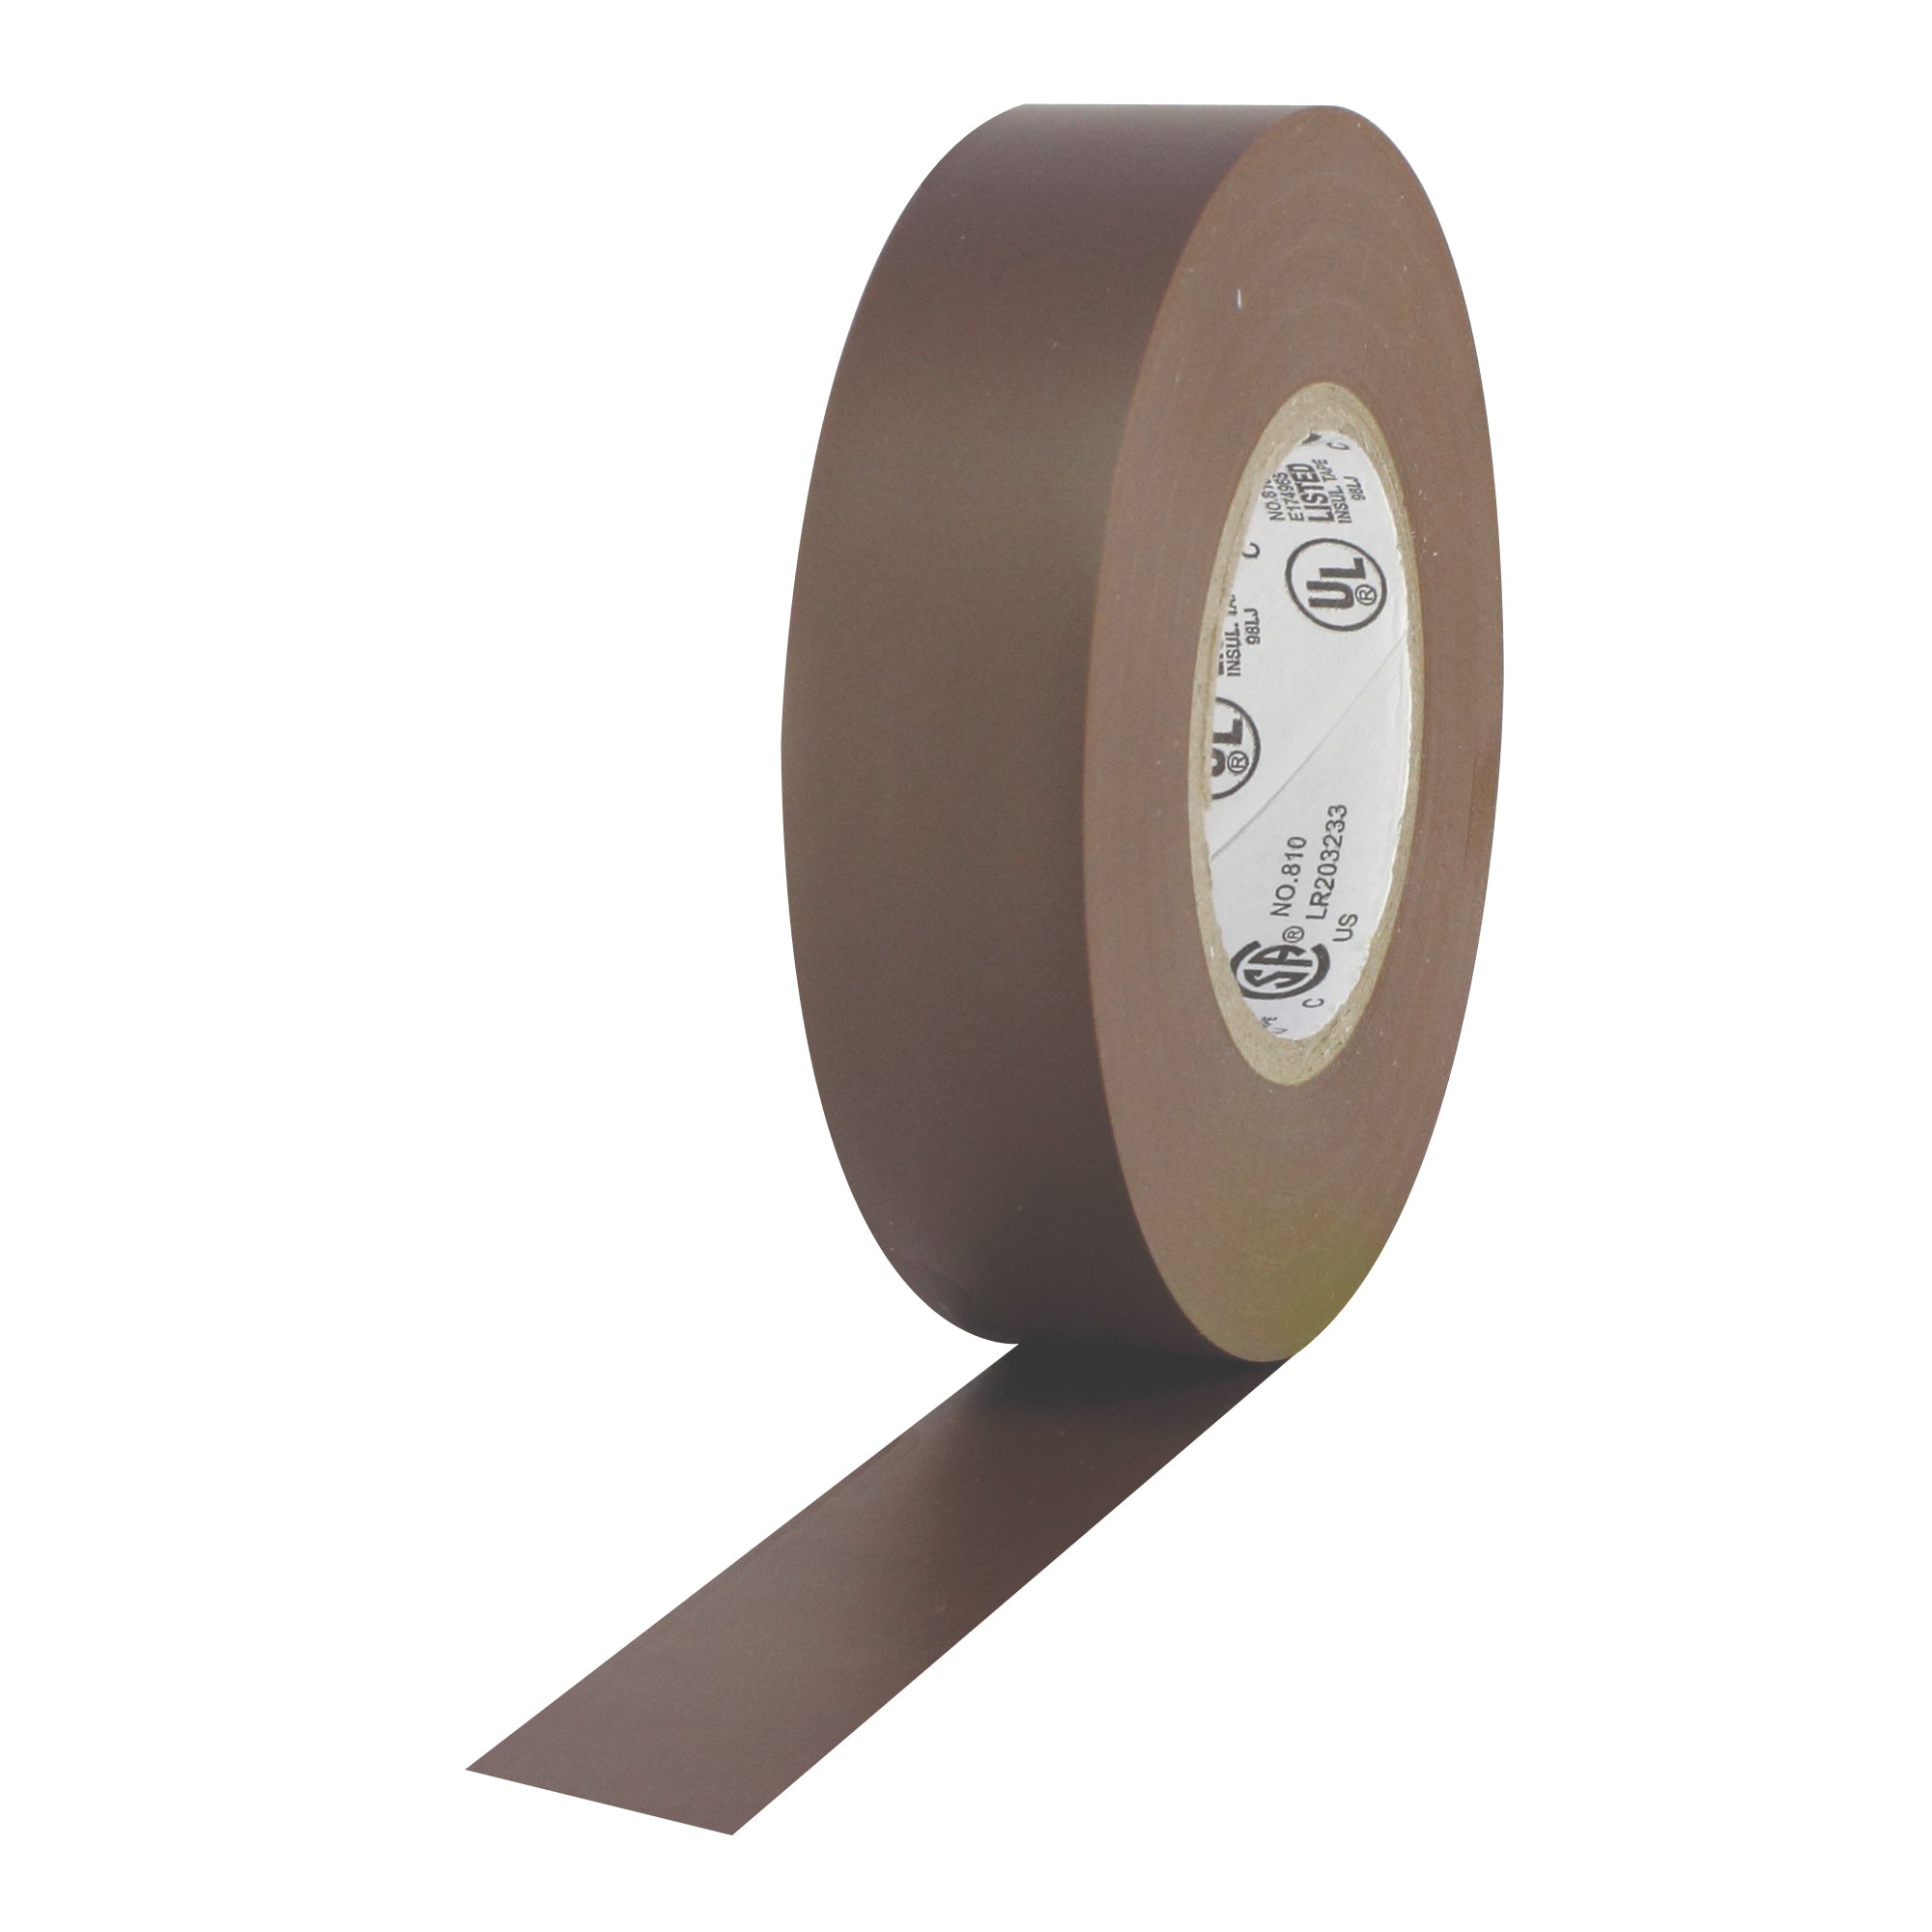 Pro Tapes Pro Plus Electrical Tape - 3/4" x 60', Brown